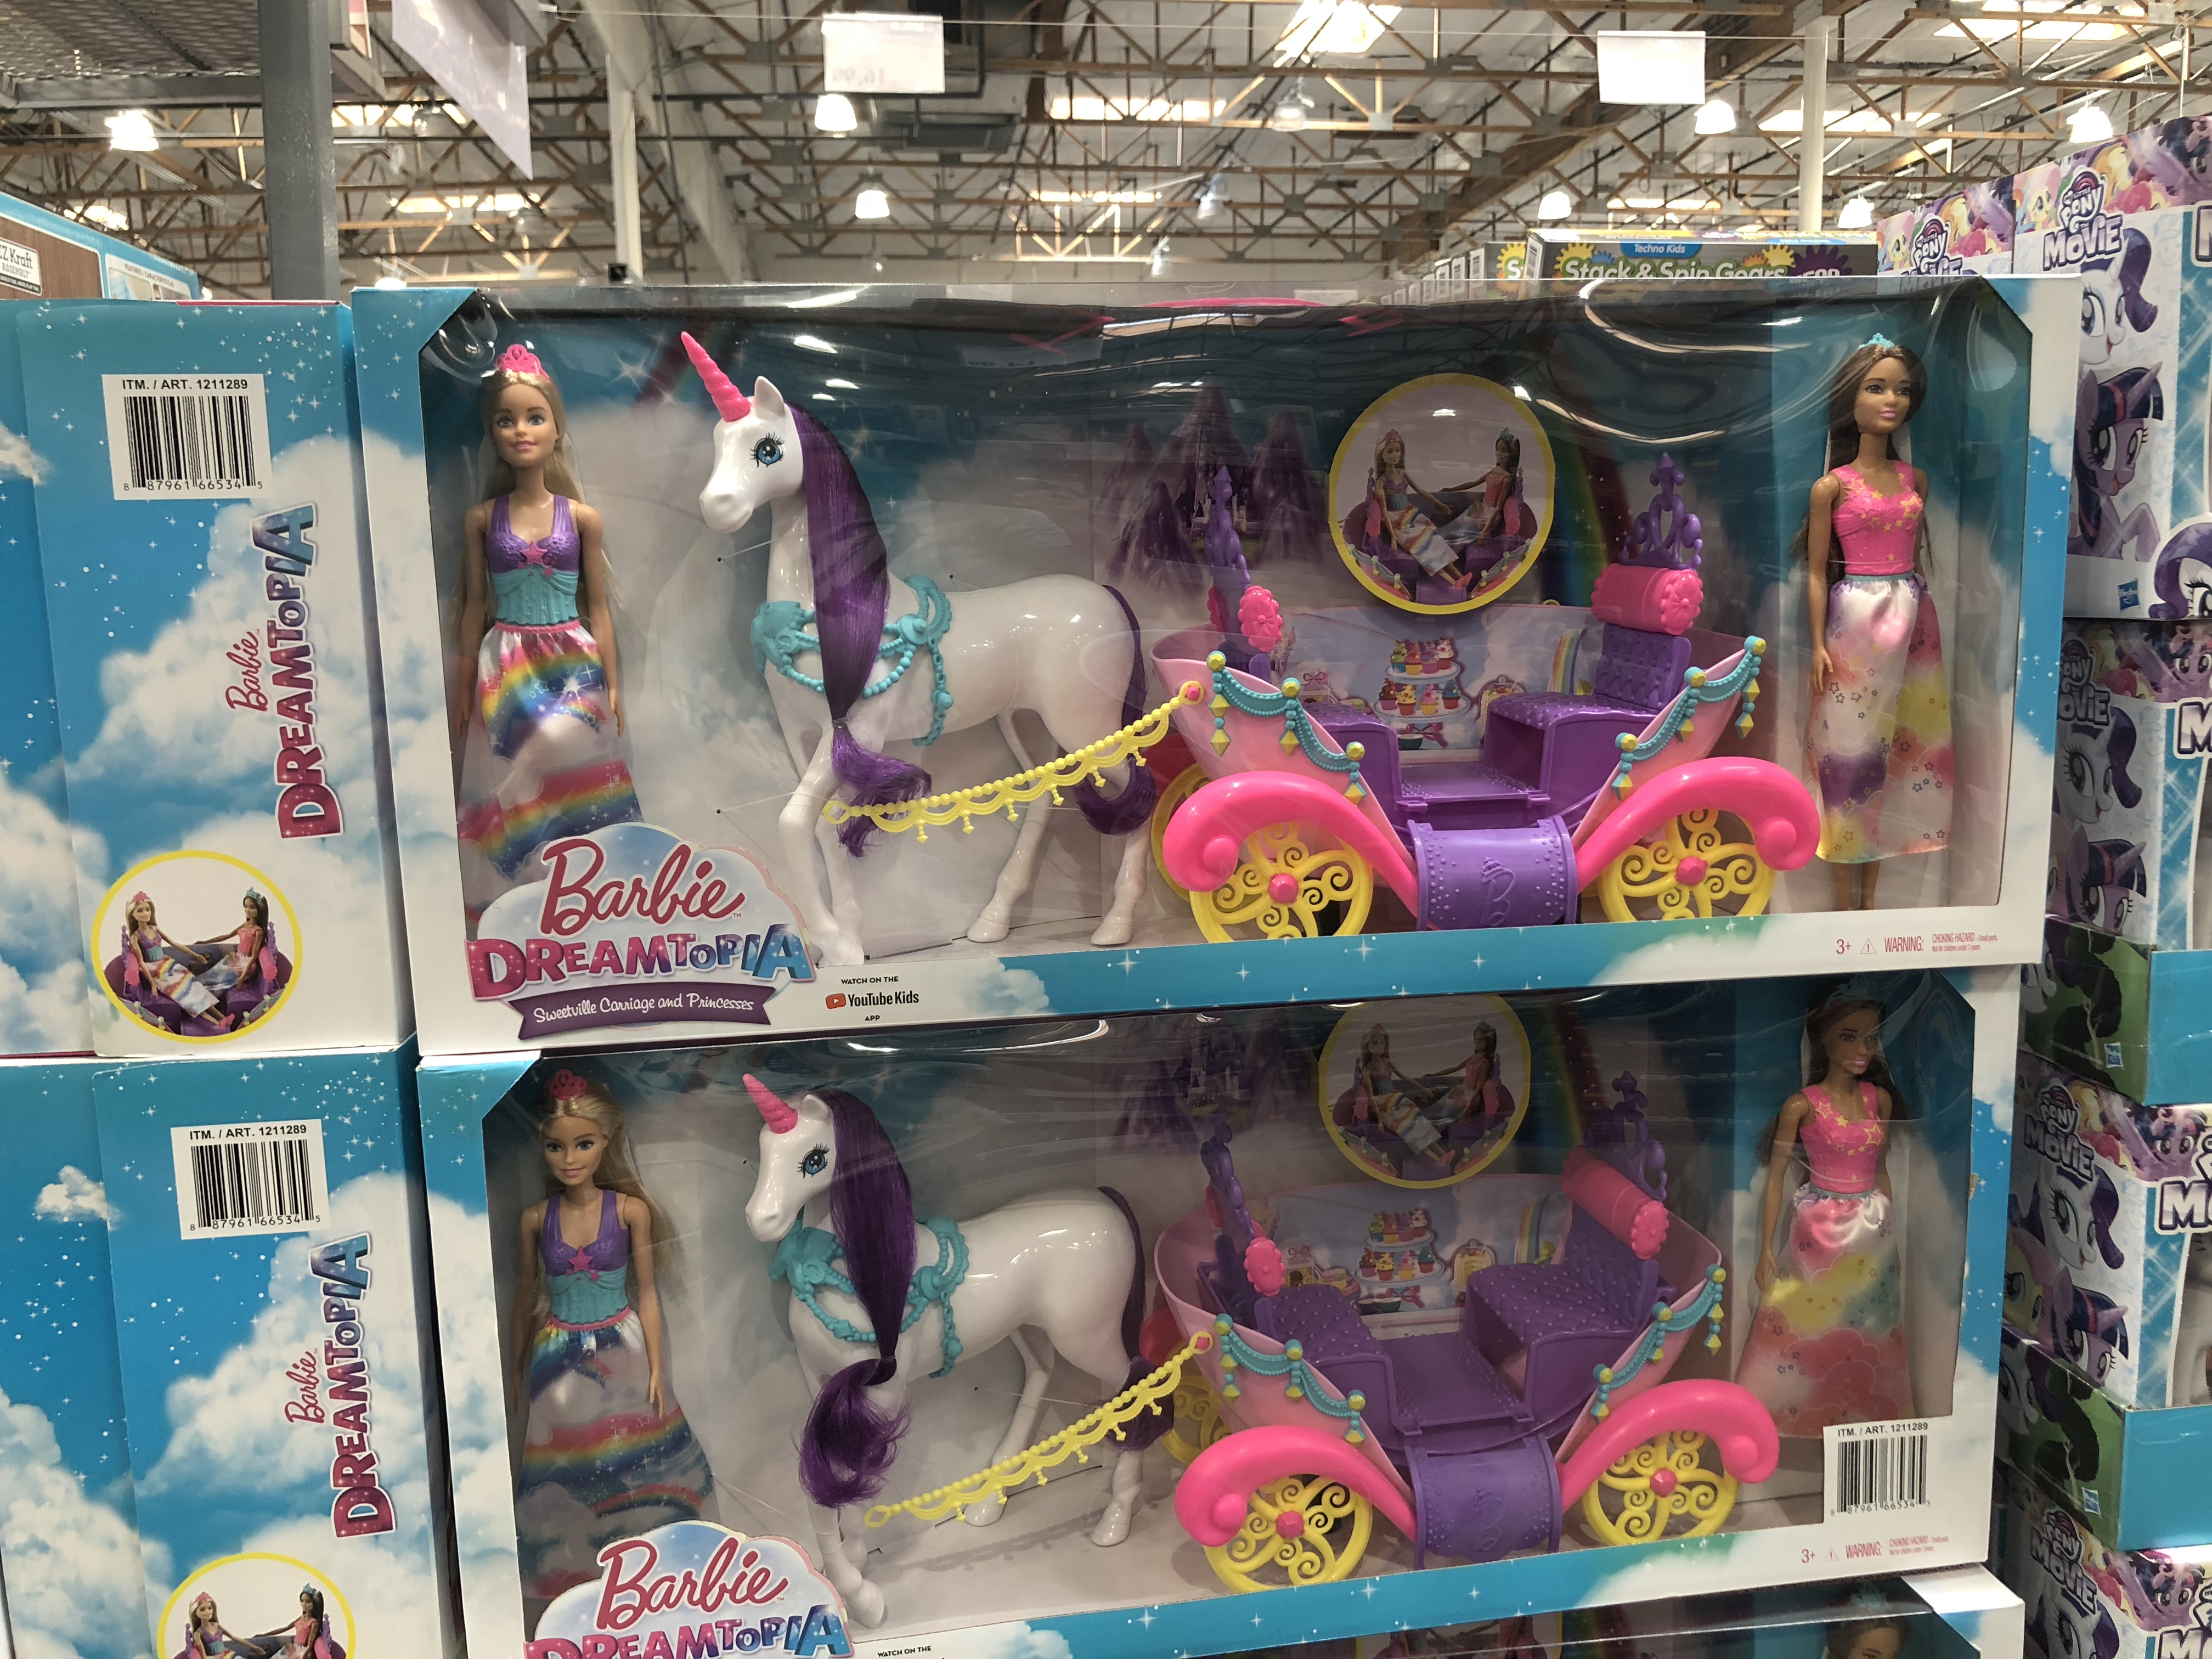 The best holiday toy deals for 2018 include Barbie Dreamtopia at Costco